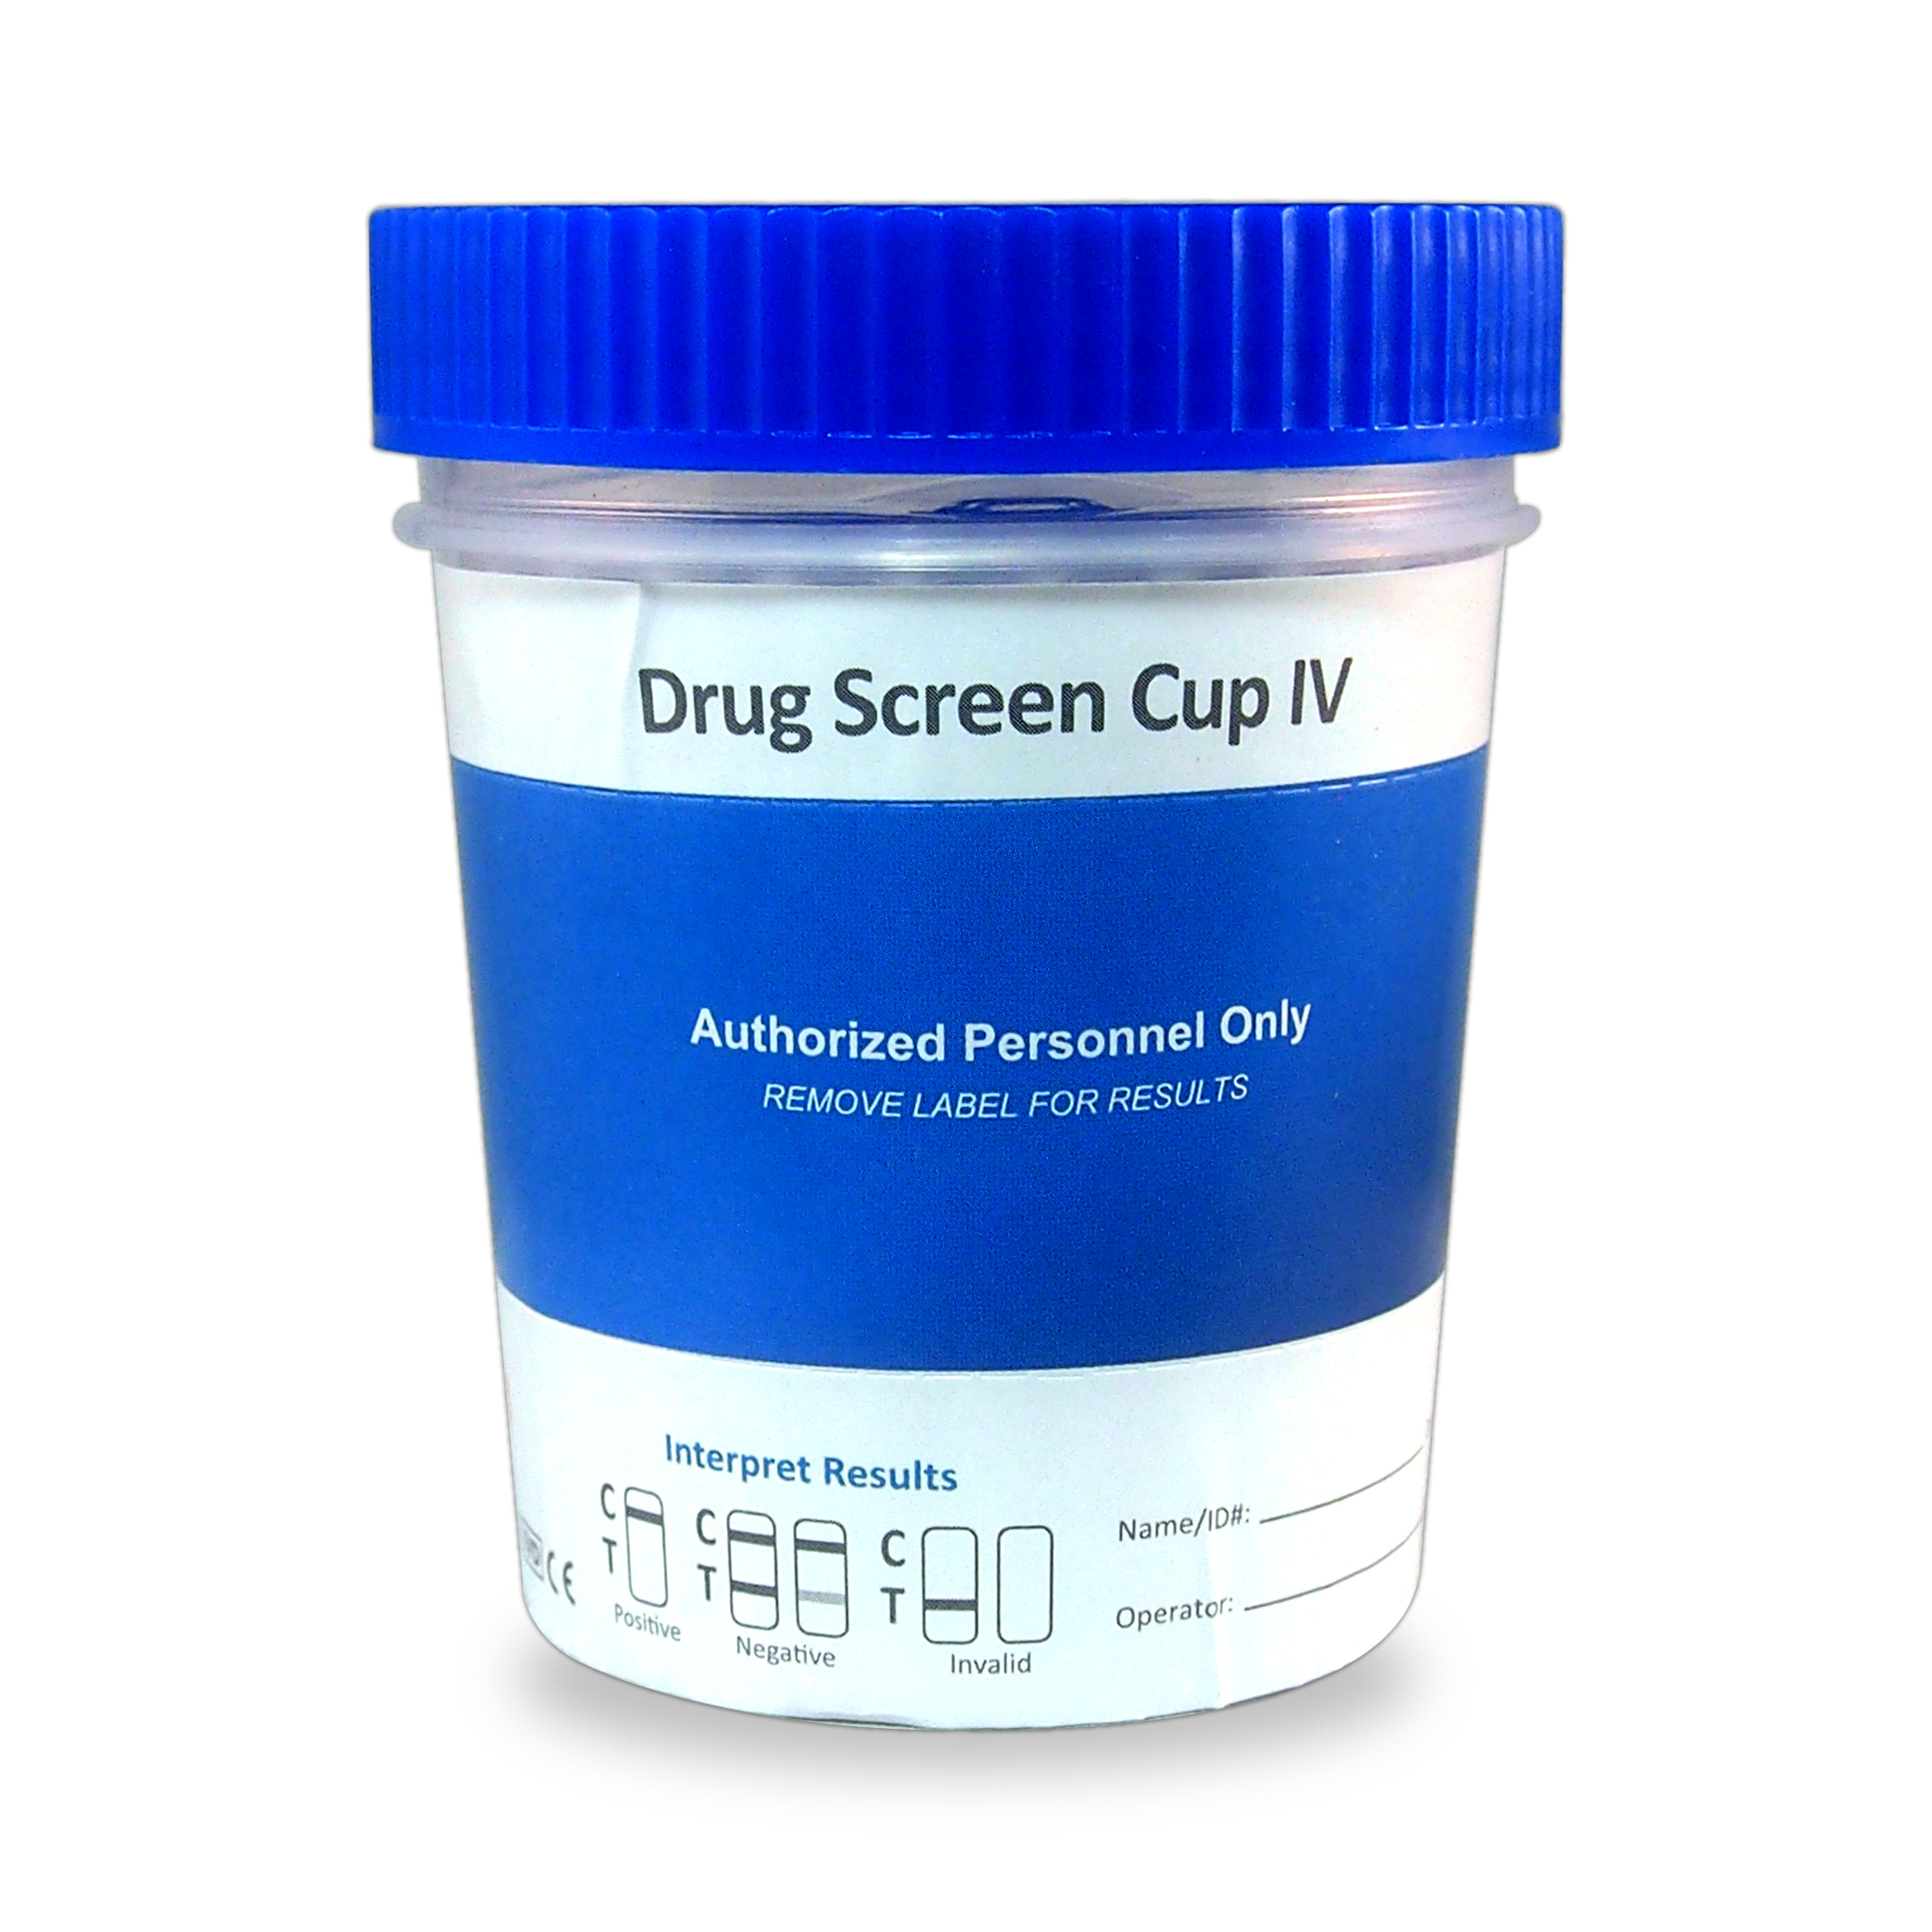 Drug Screen Cup IV